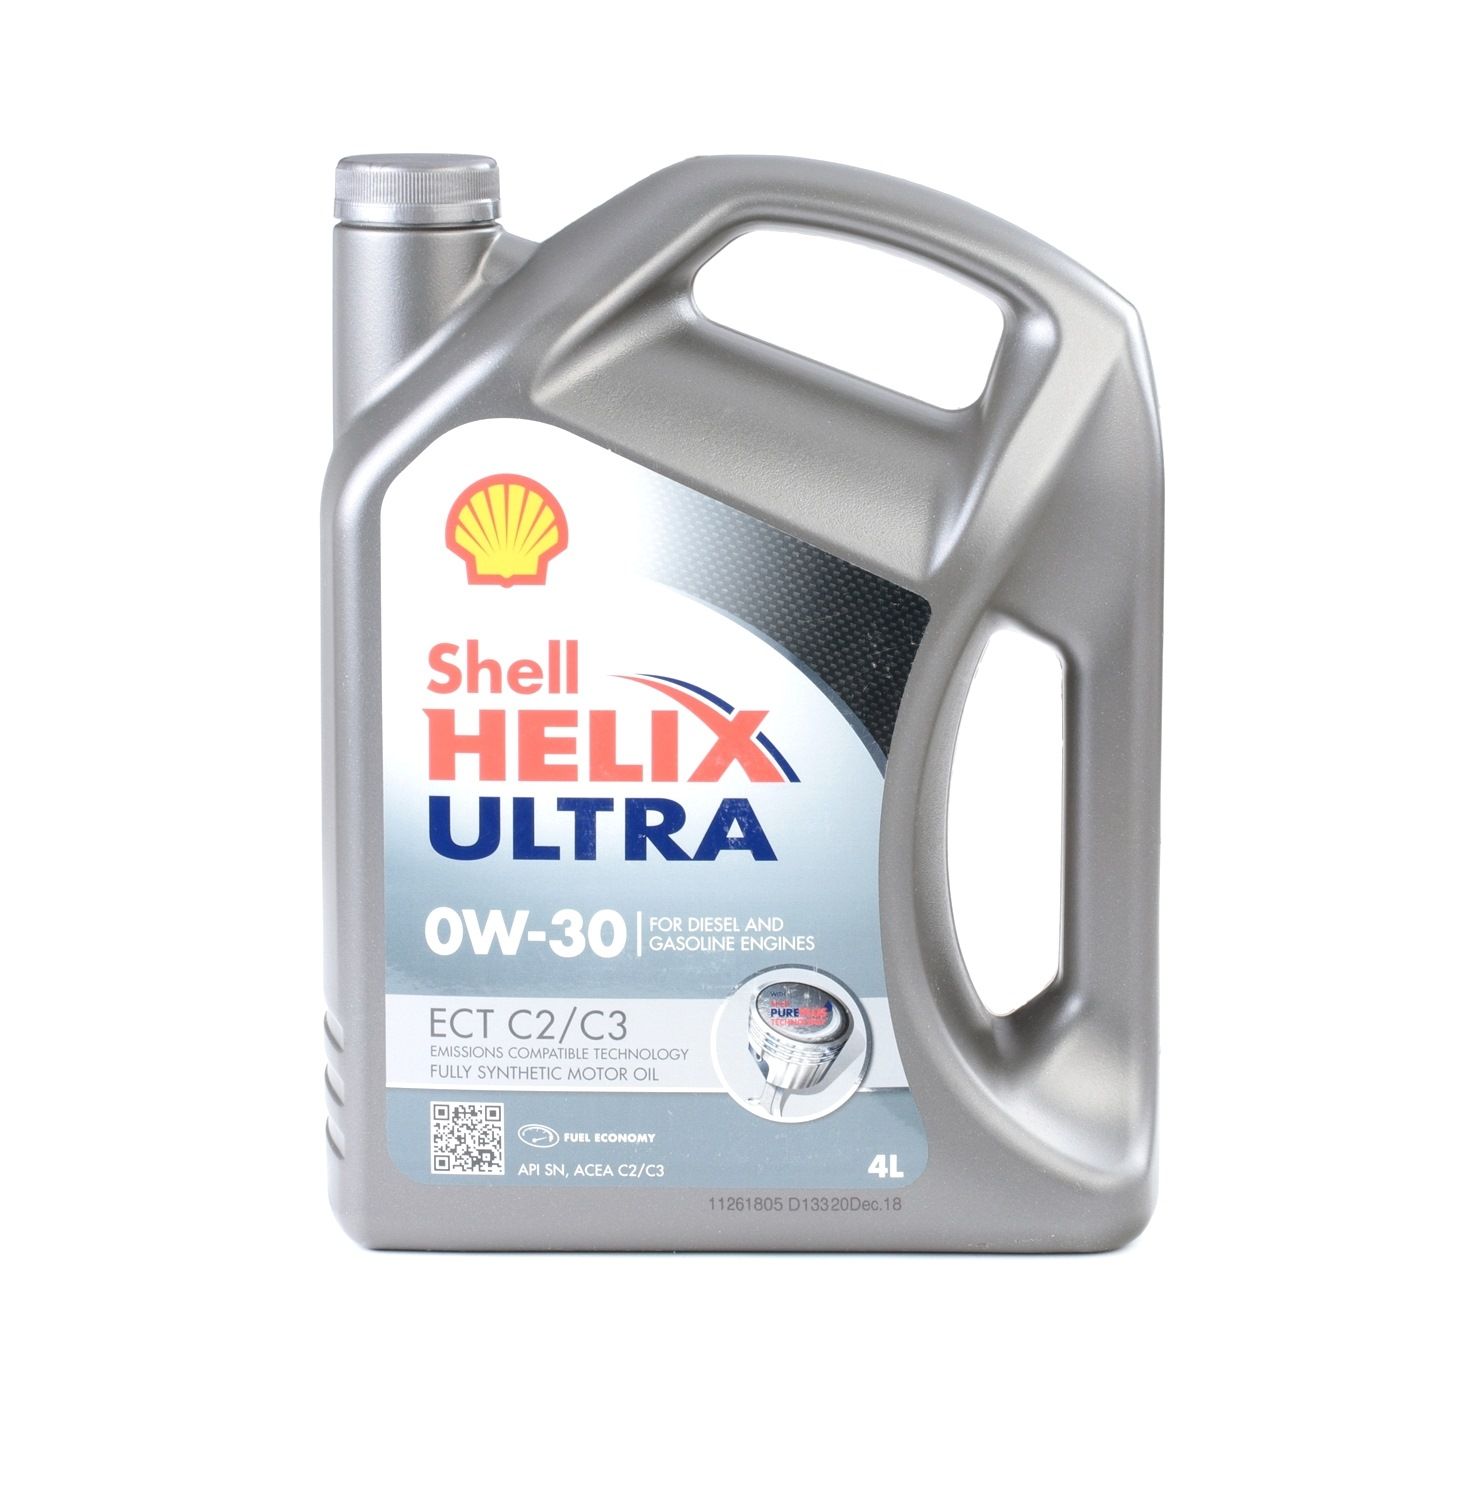 Engine oil MB 229.52 SHELL diesel - 550046306 Helix, Ultra ECT C2/C3